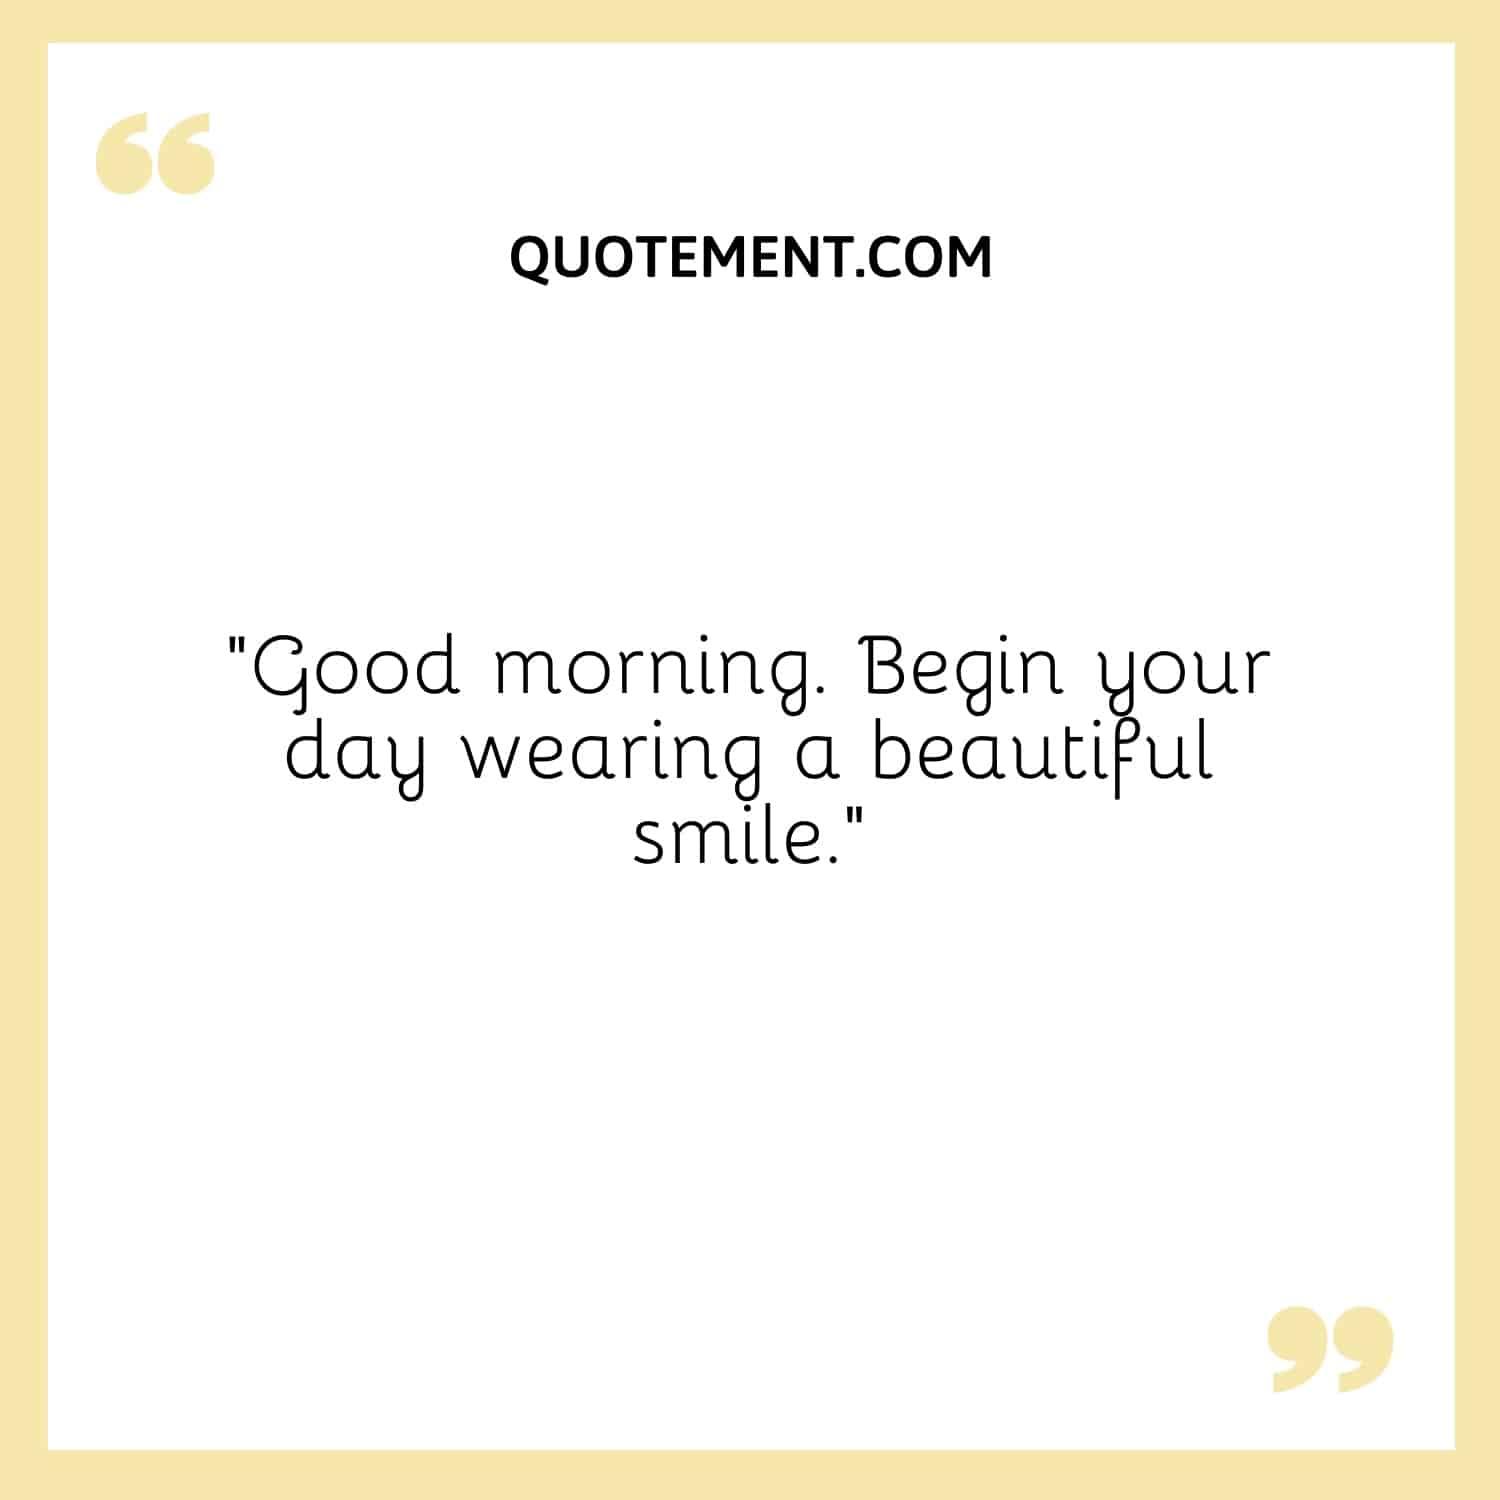 Good morning. Begin your day wearing a beautiful smile